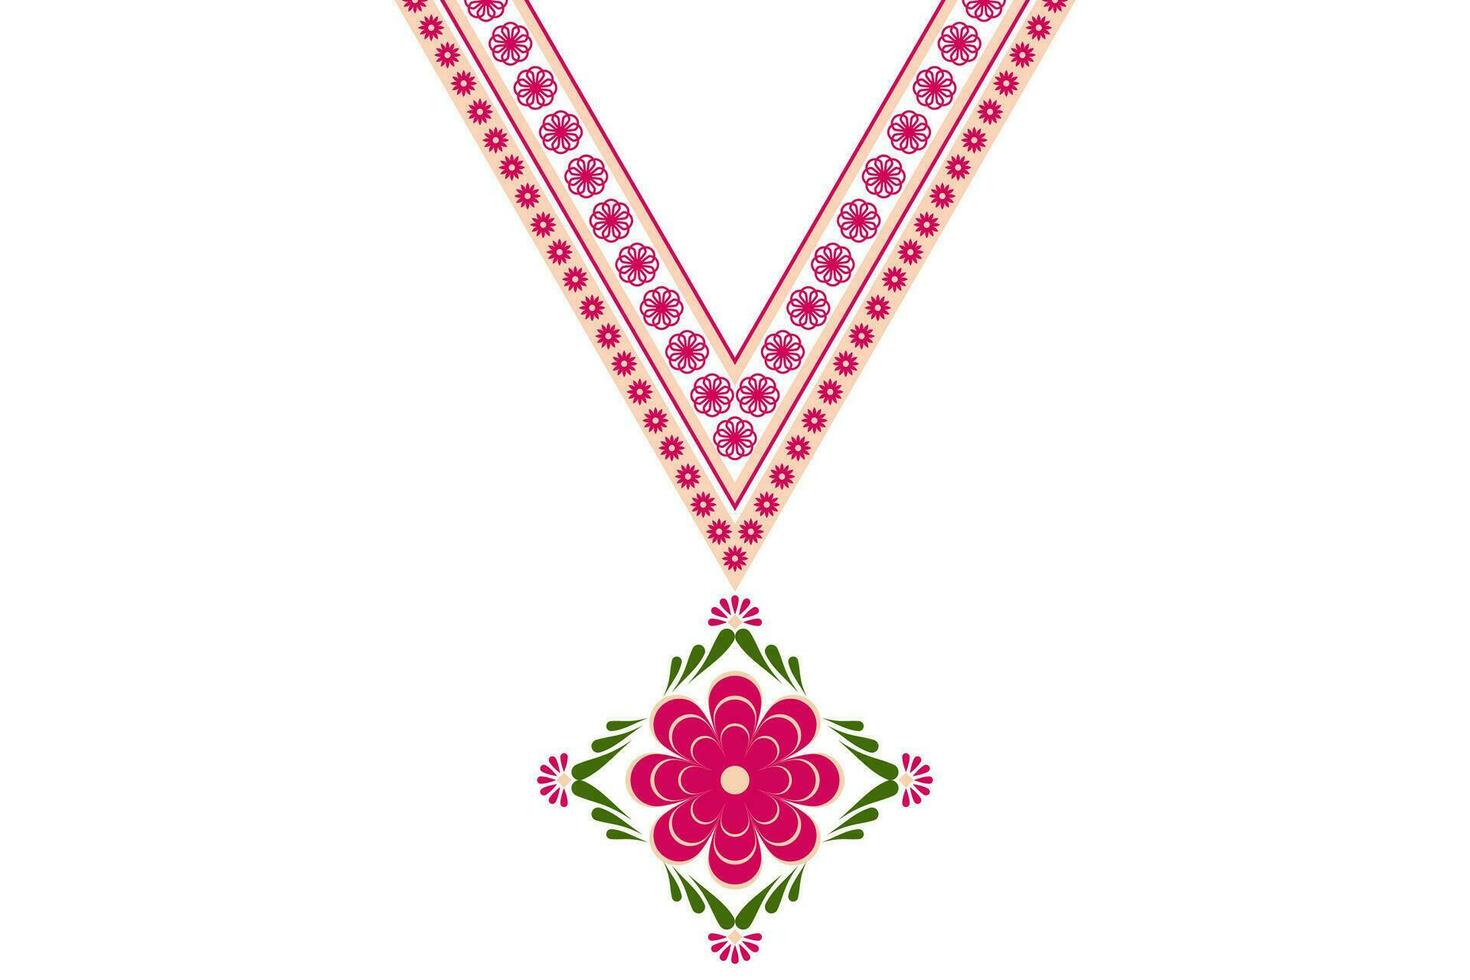 Beautiful ethnic collar lace oriental pattern traditional on white background. Aztec style embroidery abstract vector illustration. Designs for fashion texture, fabric, fashion women, print, clothes